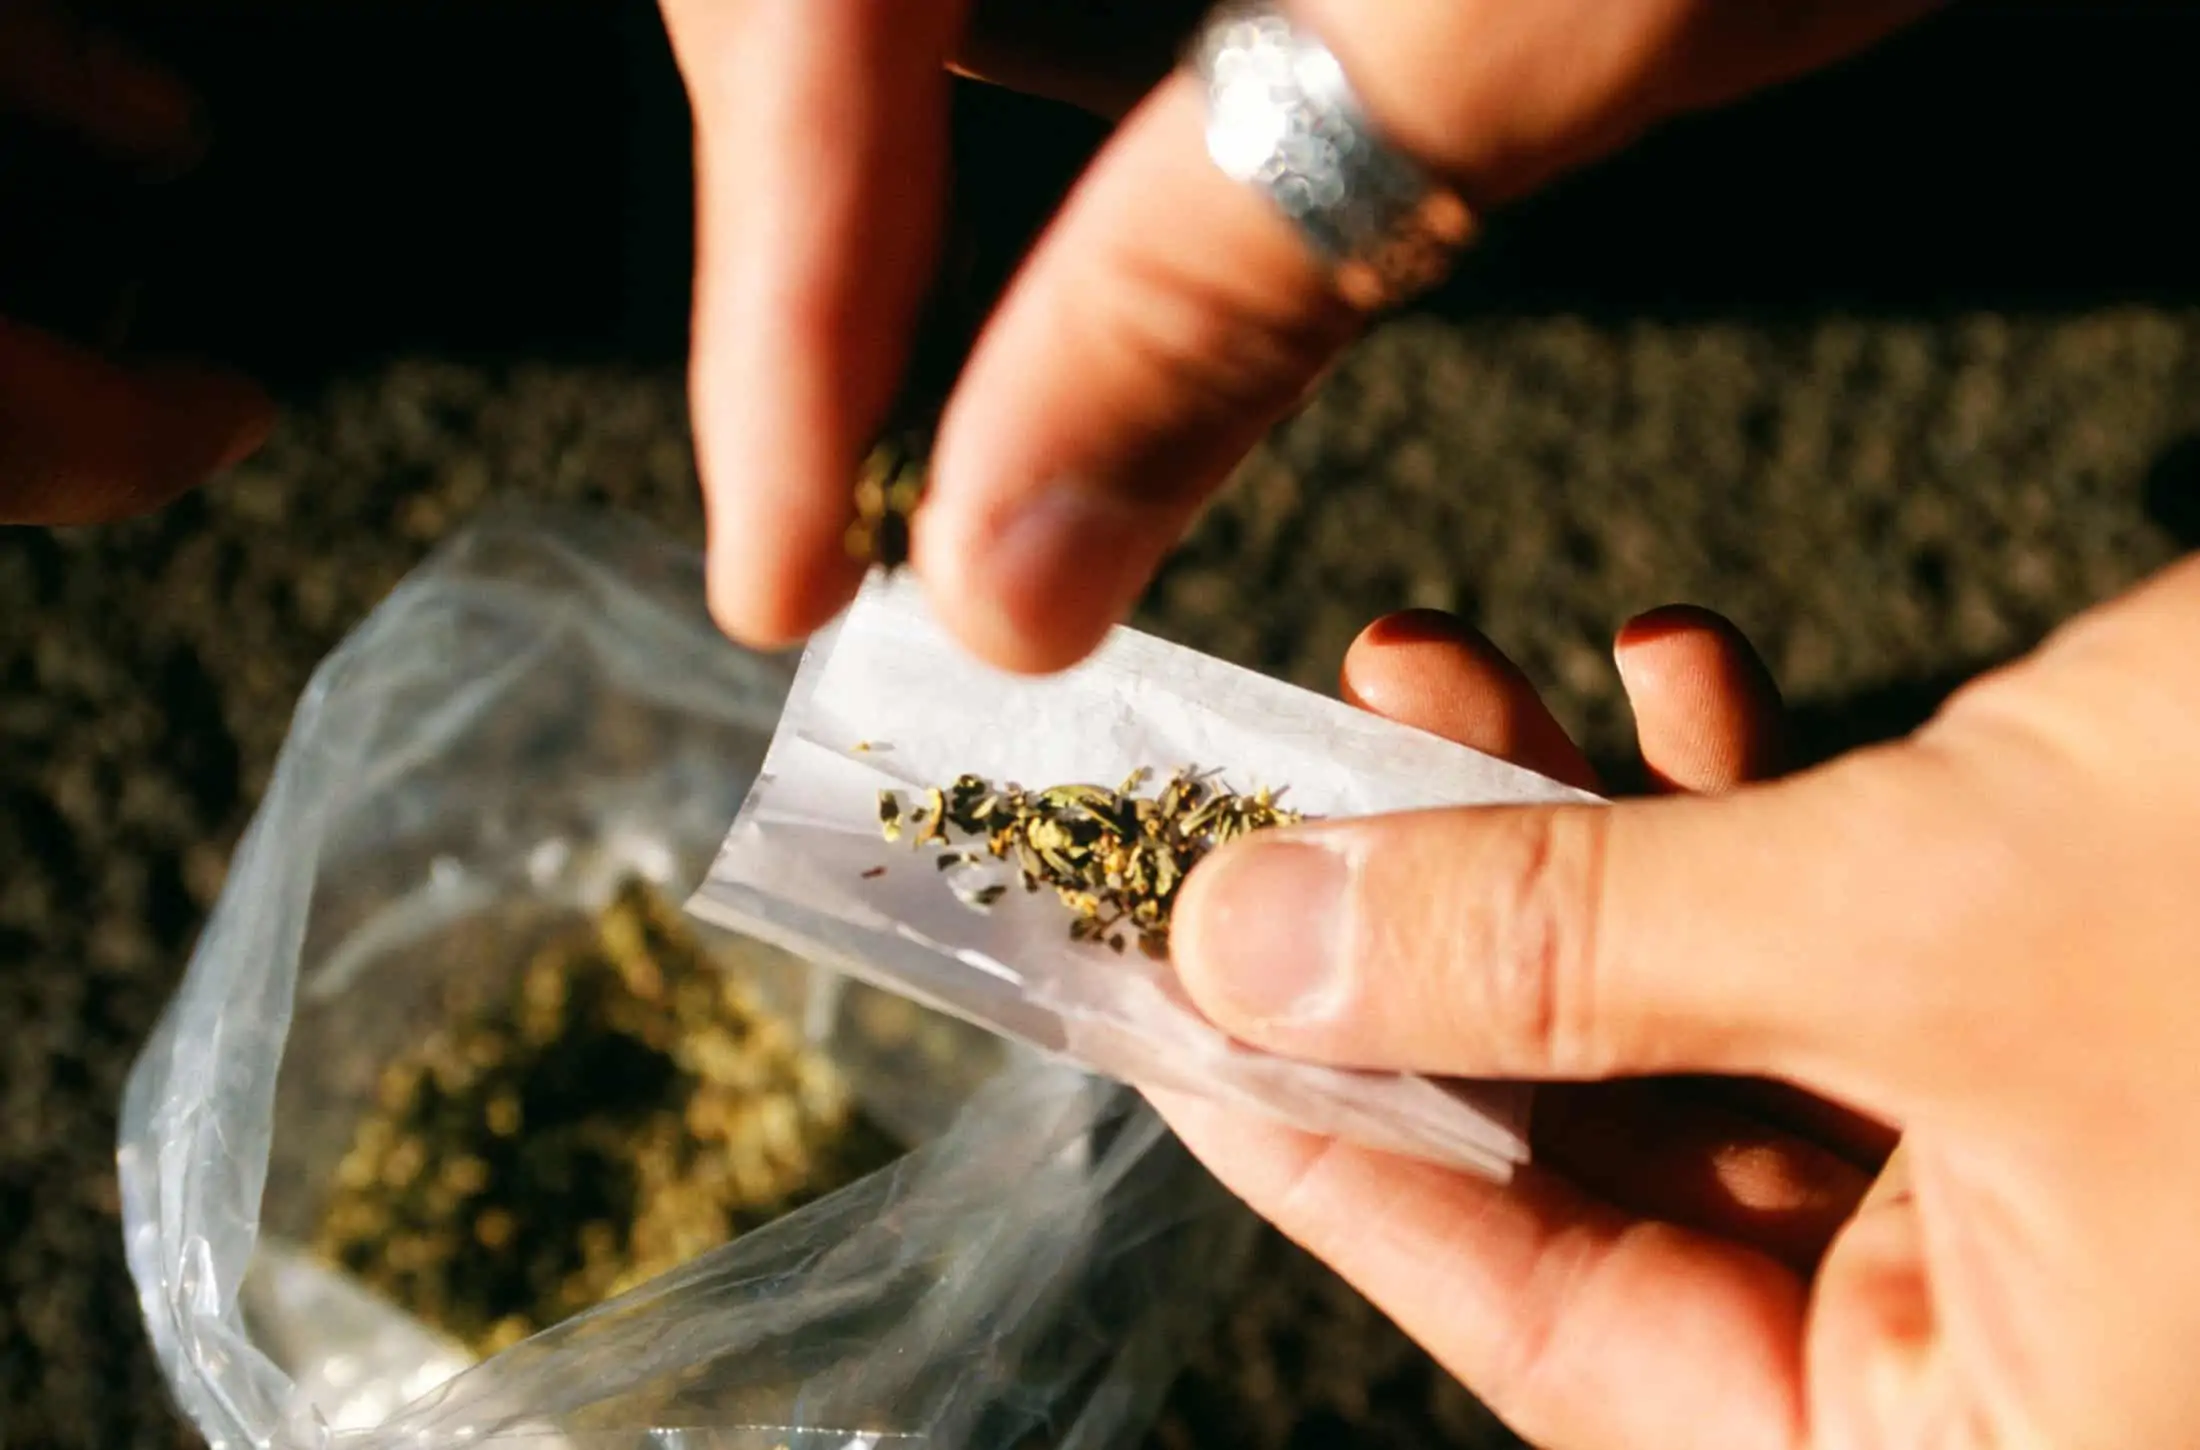 What is Synthetic Cannabis & Why is it So Bad?